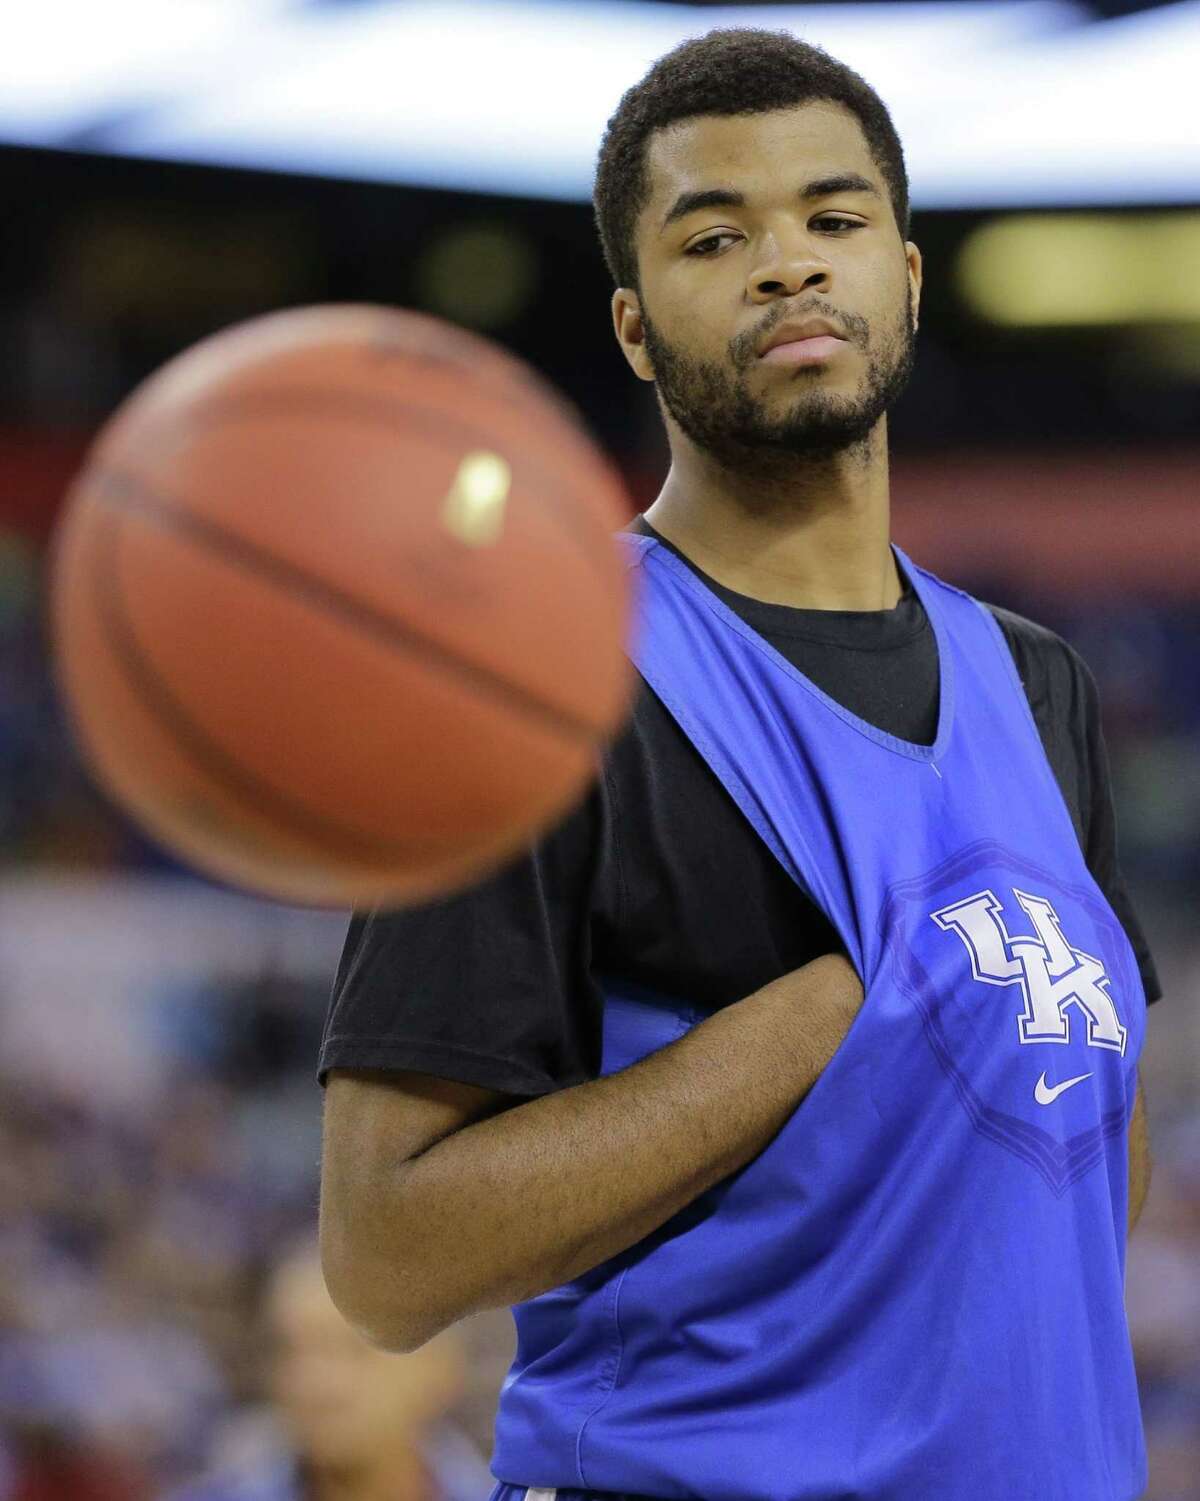 In this April 3, 2015 photo, Kentucky’s Andrew Harrison watches a ball during a practice session for the NCAA Final Four tournament college basketball semifinal game in Indianapolis.